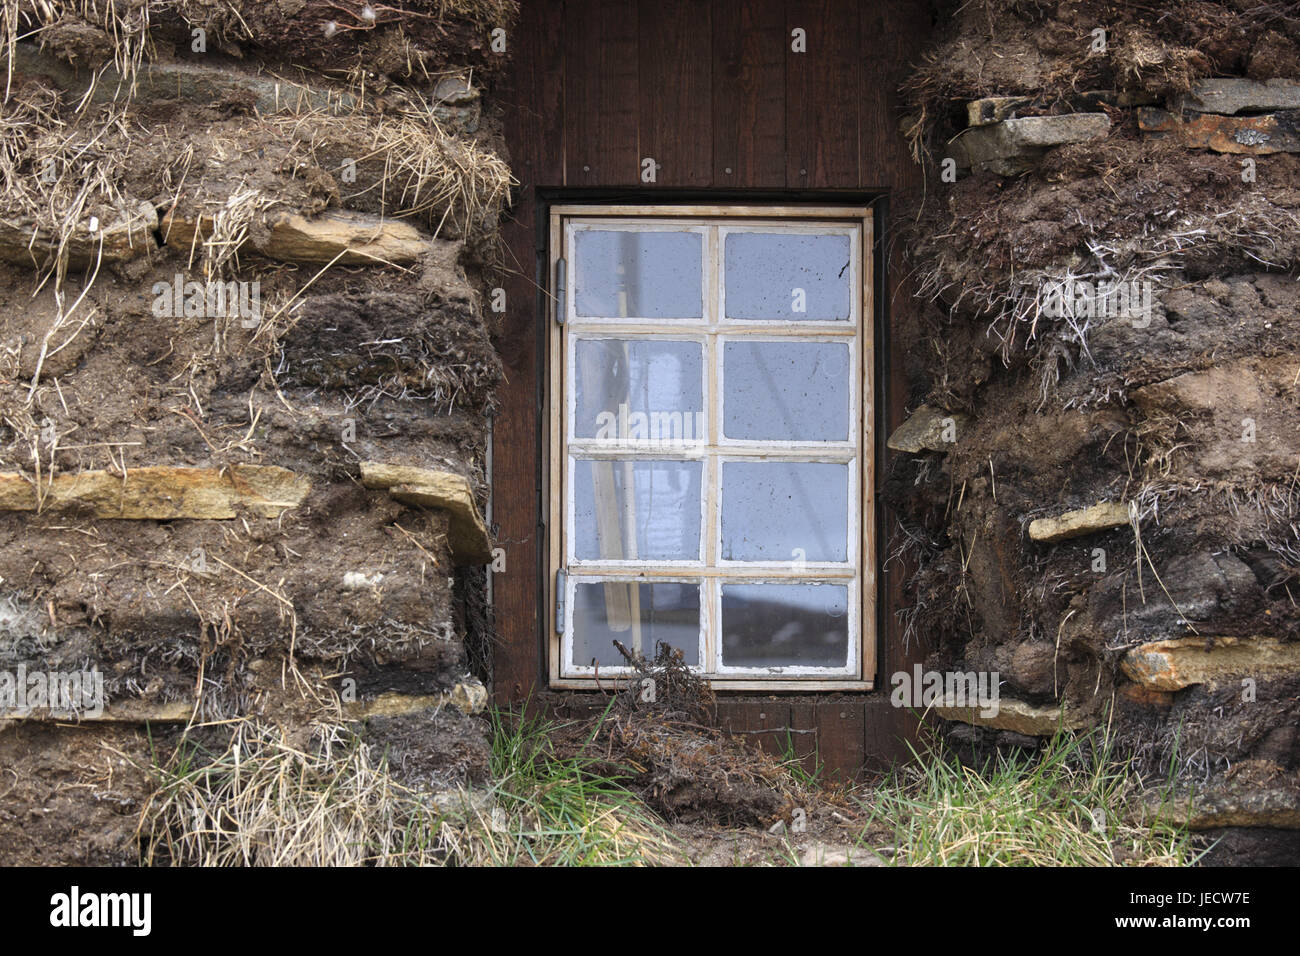 Greenland, Sisimiut, museum, earth house, window, detail, Western Greenland, town, destination, place of interest, culture, outside, Inuit, Inuit culture, house, building, architecture, defensive walls, earth steelworks, rung window, stones, Stock Photo